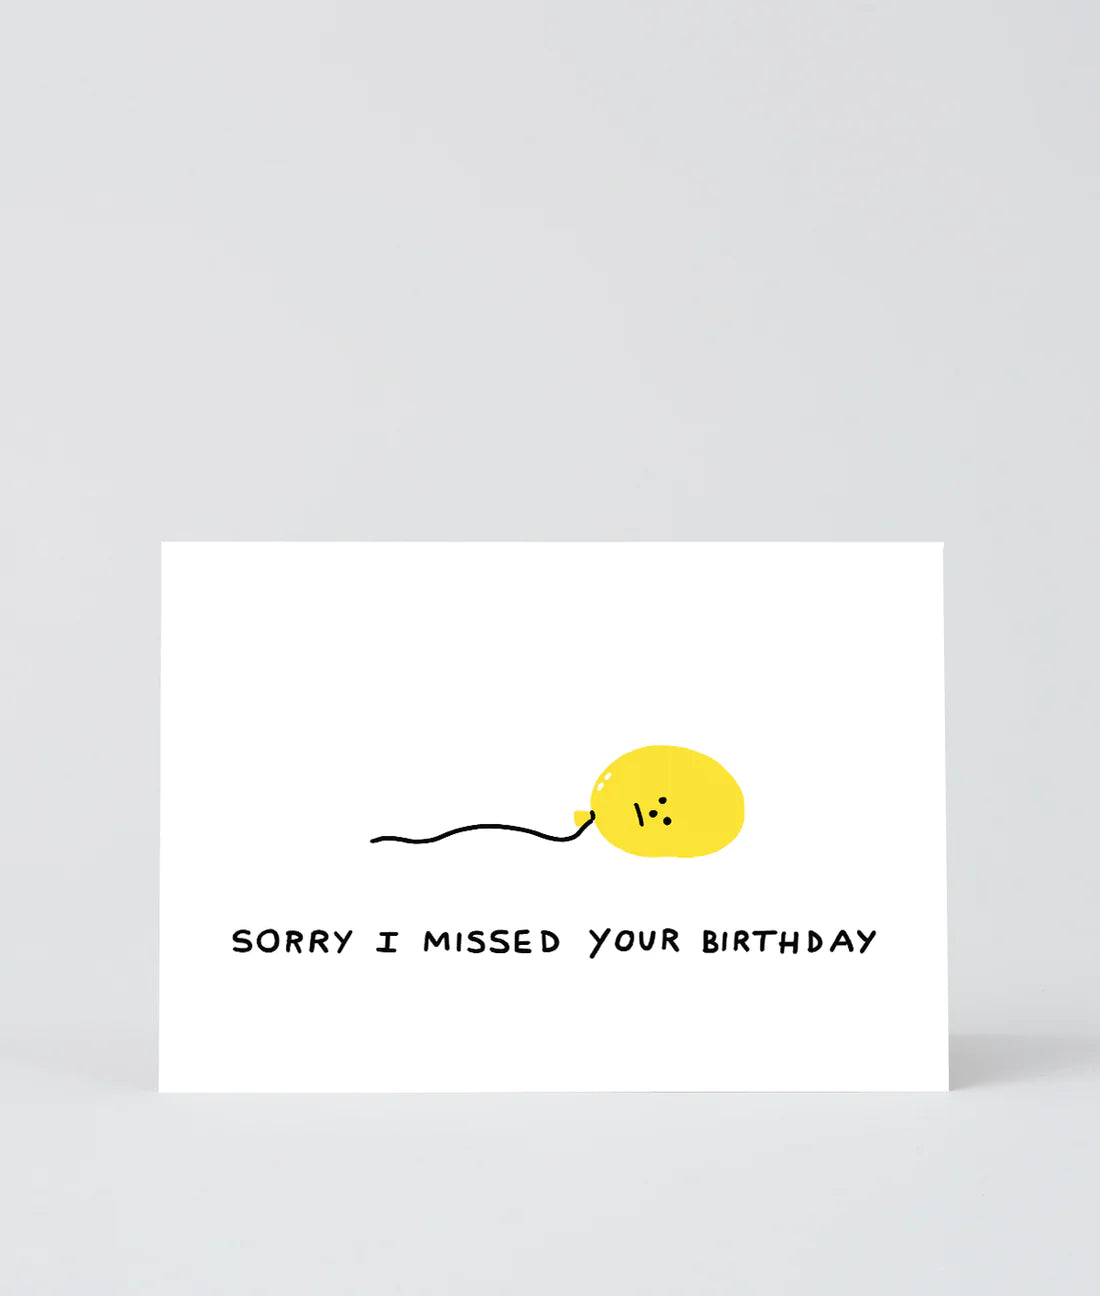 Sorry I missed your birthday Card